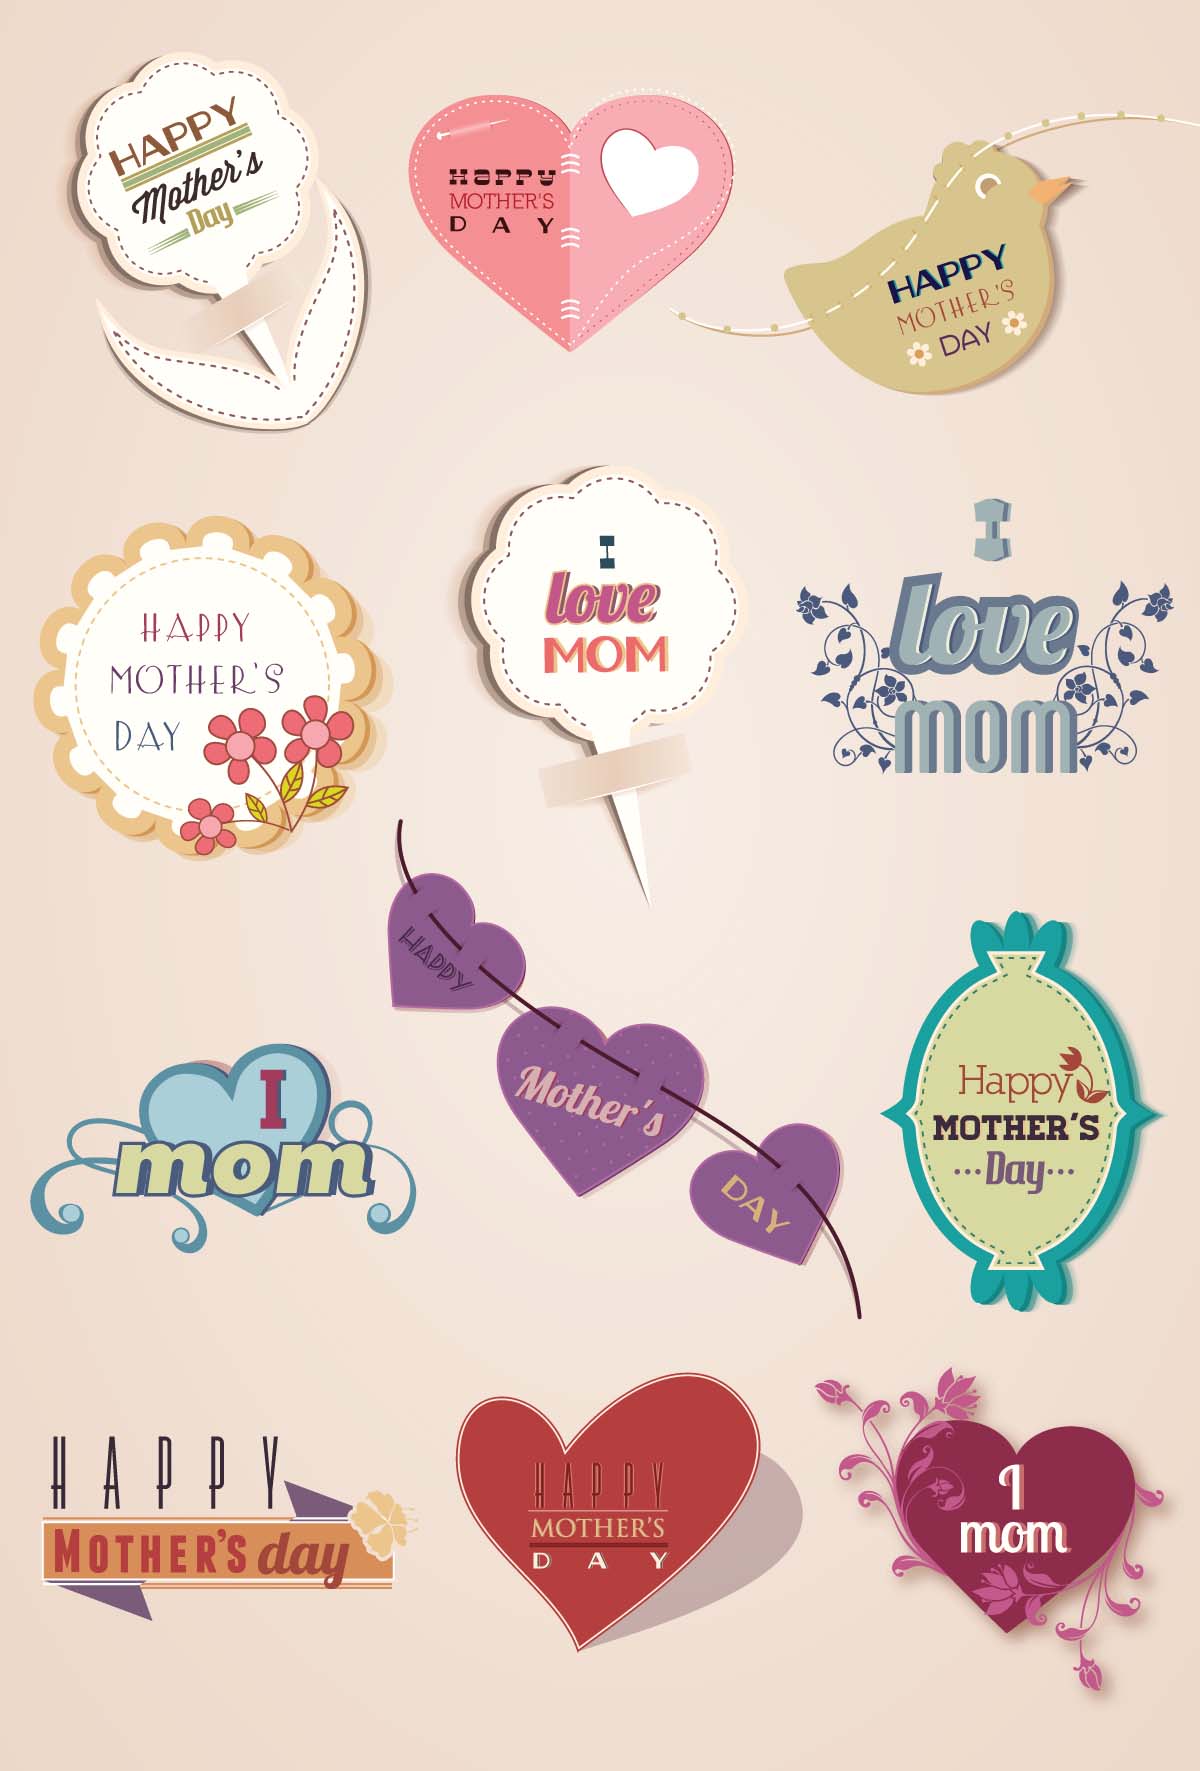 Mother's day elements with hearts and ribbons set vector